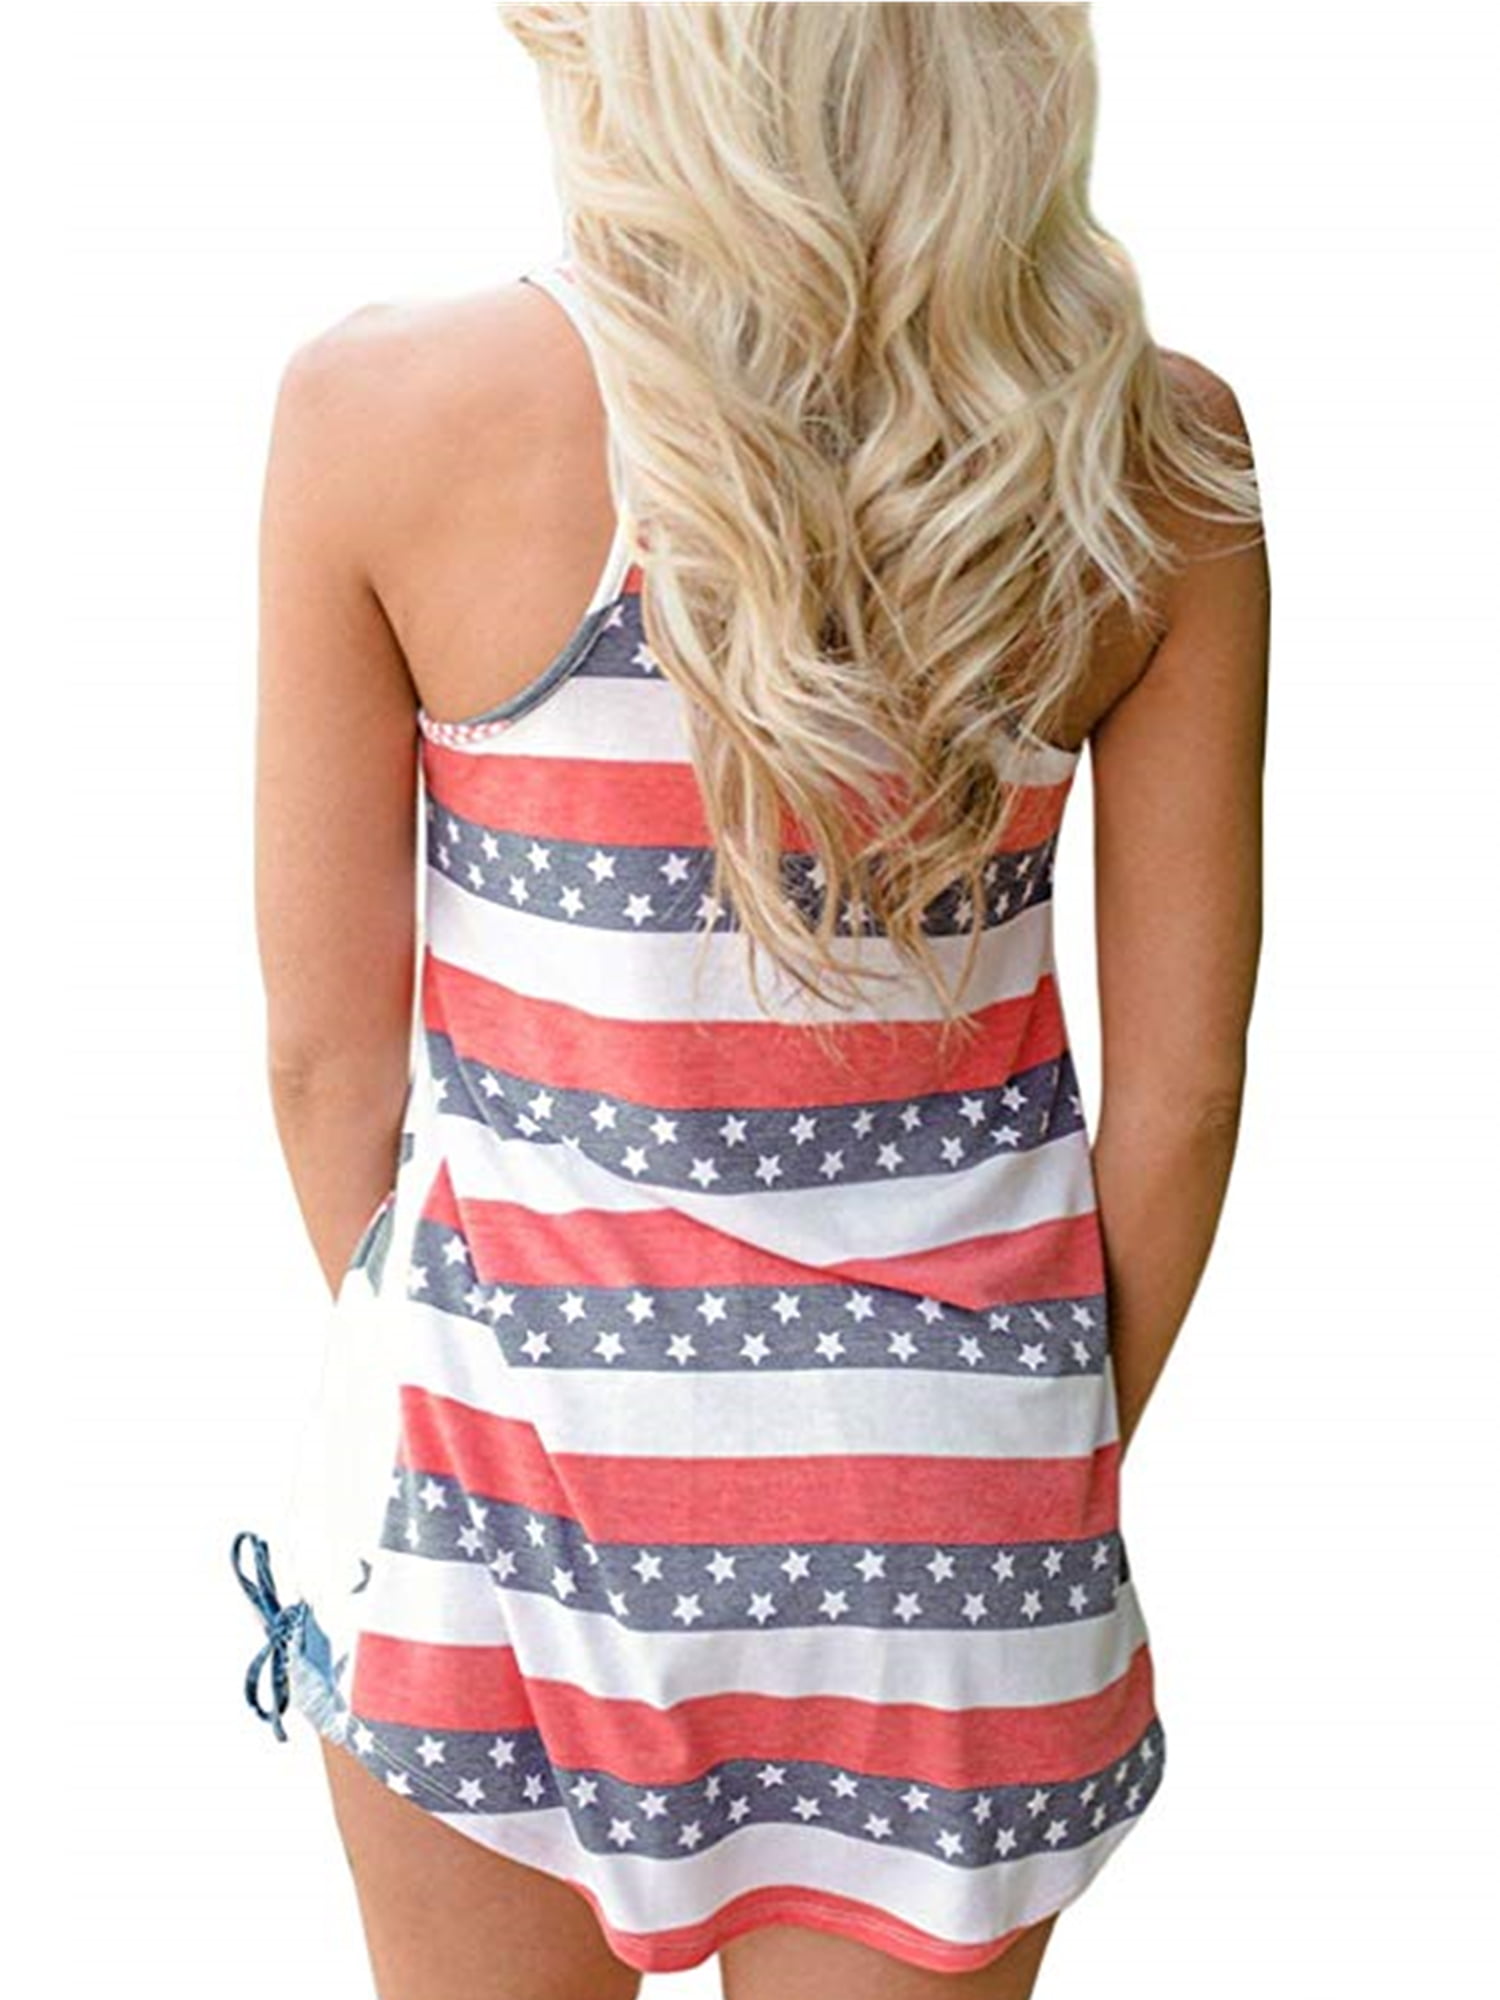 Ukap American Independence Day Tank Top for Women Fashion Summer Sleeveless Tops Casual USA Flag Print Vest Camisole Stripe Star T-Shirt Blouse